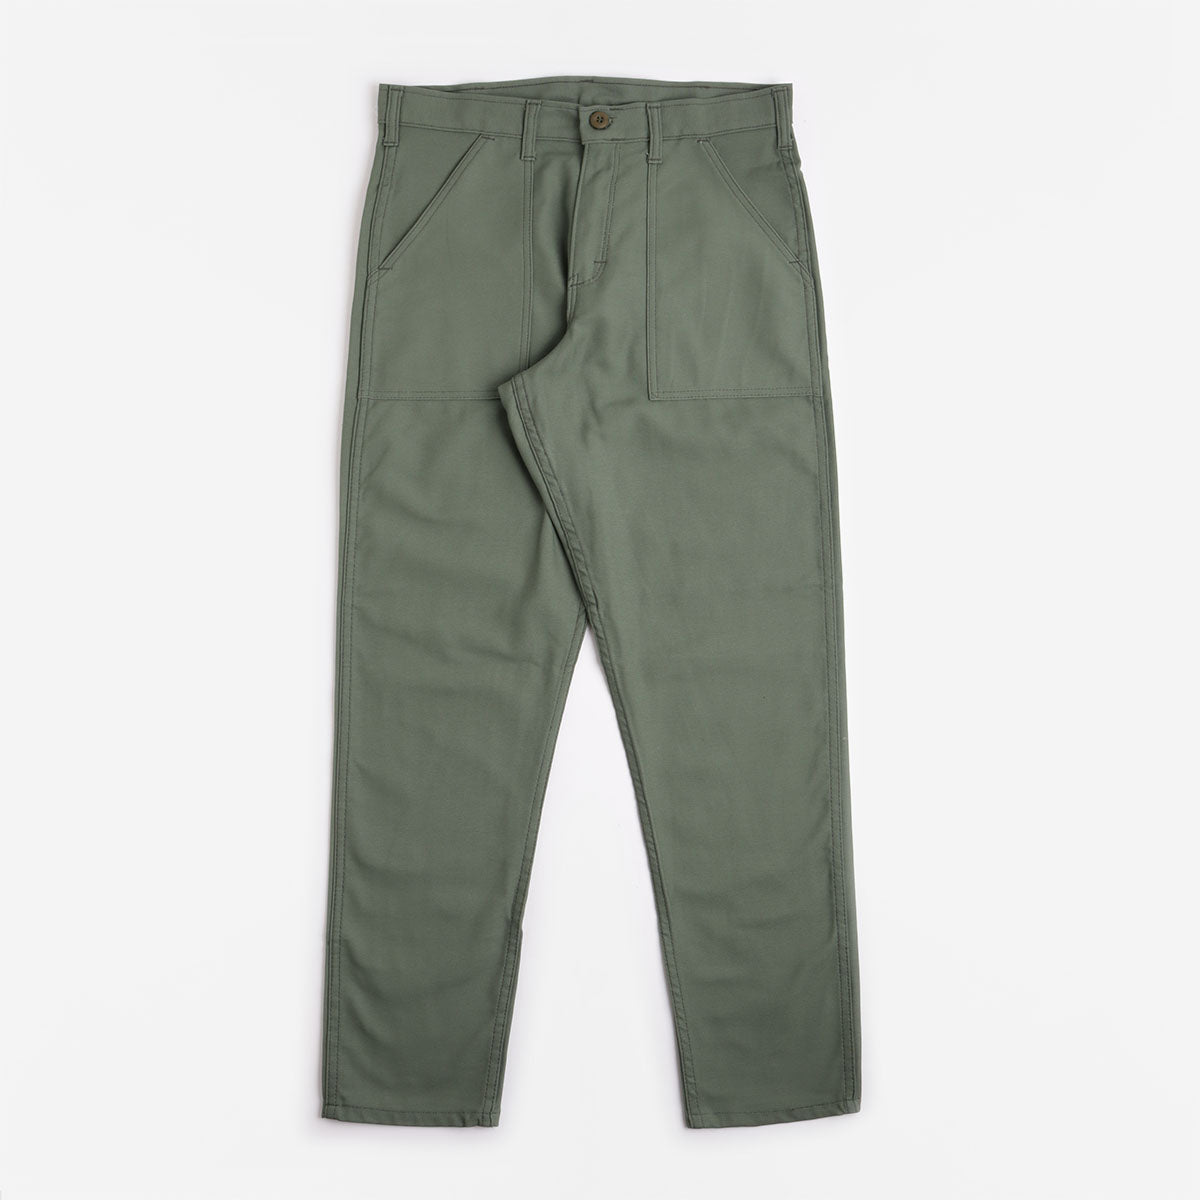 Stan Ray Slim Fit 4 Pocket Fatigue Pant - 1300 series, Olive Sateen, Detail Shot 2